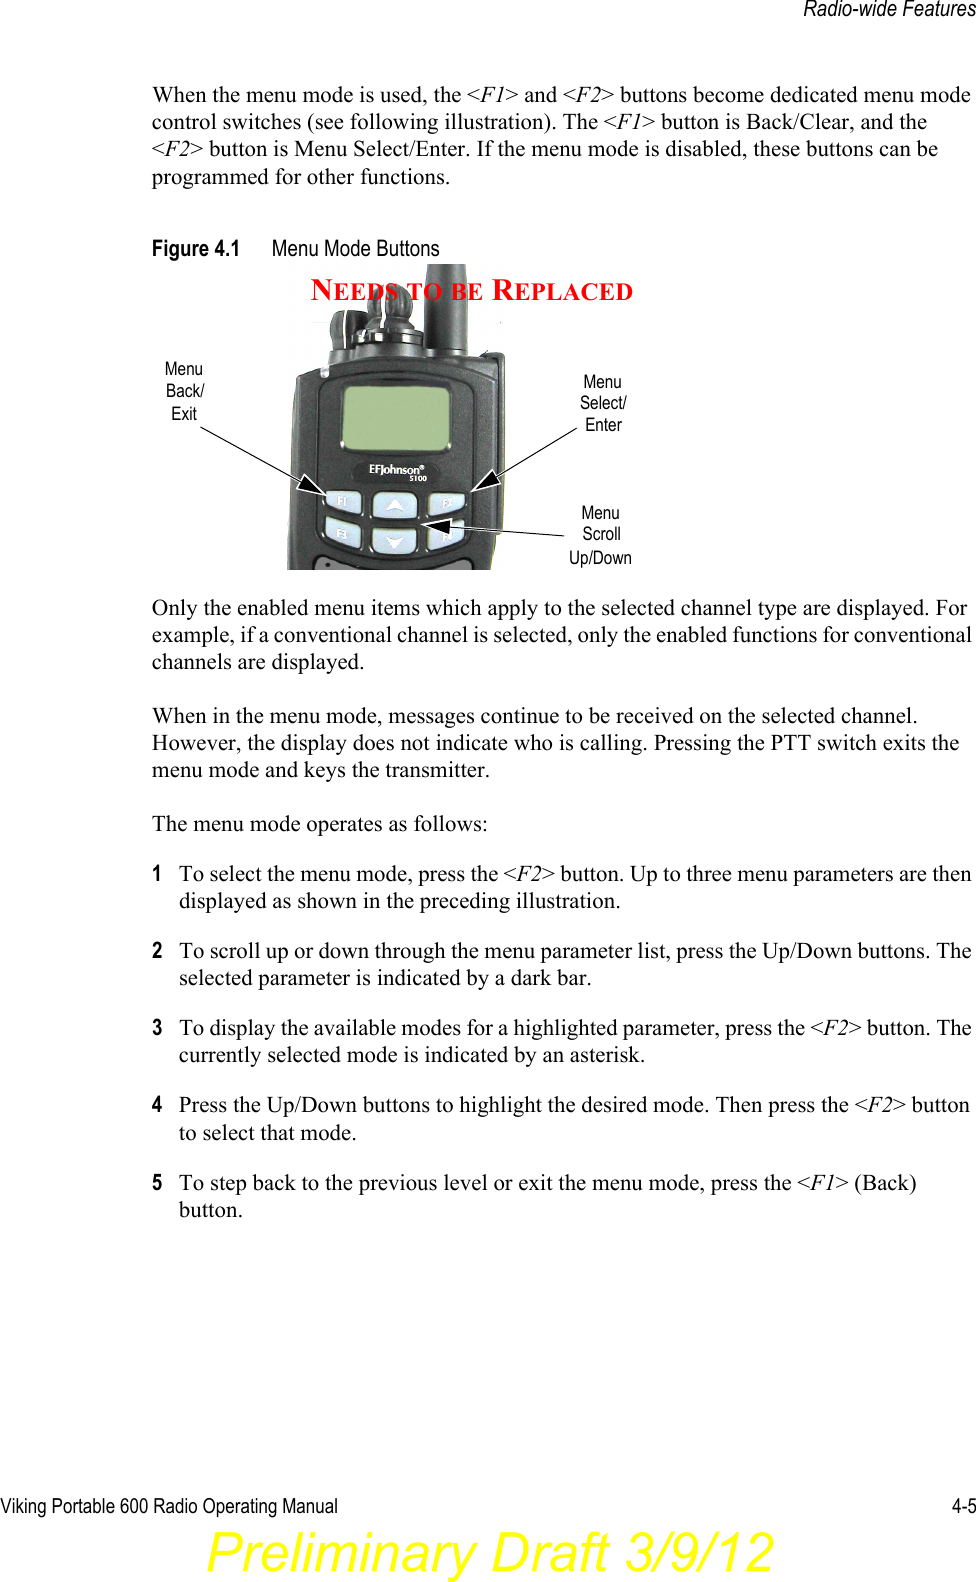 Viking Portable 600 Radio Operating Manual 4-5Radio-wide FeaturesWhen the menu mode is used, the &lt;F1&gt; and &lt;F2&gt; buttons become dedicated menu mode control switches (see following illustration). The &lt;F1&gt; button is Back/Clear, and the &lt;F2&gt; button is Menu Select/Enter. If the menu mode is disabled, these buttons can be programmed for other functions.Figure 4.1 Menu Mode ButtonsOnly the enabled menu items which apply to the selected channel type are displayed. For example, if a conventional channel is selected, only the enabled functions for conventional channels are displayed.When in the menu mode, messages continue to be received on the selected channel. However, the display does not indicate who is calling. Pressing the PTT switch exits the menu mode and keys the transmitter.The menu mode operates as follows:1To select the menu mode, press the &lt;F2&gt; button. Up to three menu parameters are then displayed as shown in the preceding illustration.2To scroll up or down through the menu parameter list, press the Up/Down buttons. The selected parameter is indicated by a dark bar.3To display the available modes for a highlighted parameter, press the &lt;F2&gt; button. The currently selected mode is indicated by an asterisk.4Press the Up/Down buttons to highlight the desired mode. Then press the &lt;F2&gt; button to select that mode.5To step back to the previous level or exit the menu mode, press the &lt;F1&gt; (Back) button.MenuExitBack/ MenuSelect/EnterMenuScrollUp/DownNEEDS TO BE REPLACEDPreliminary Draft 3/9/12